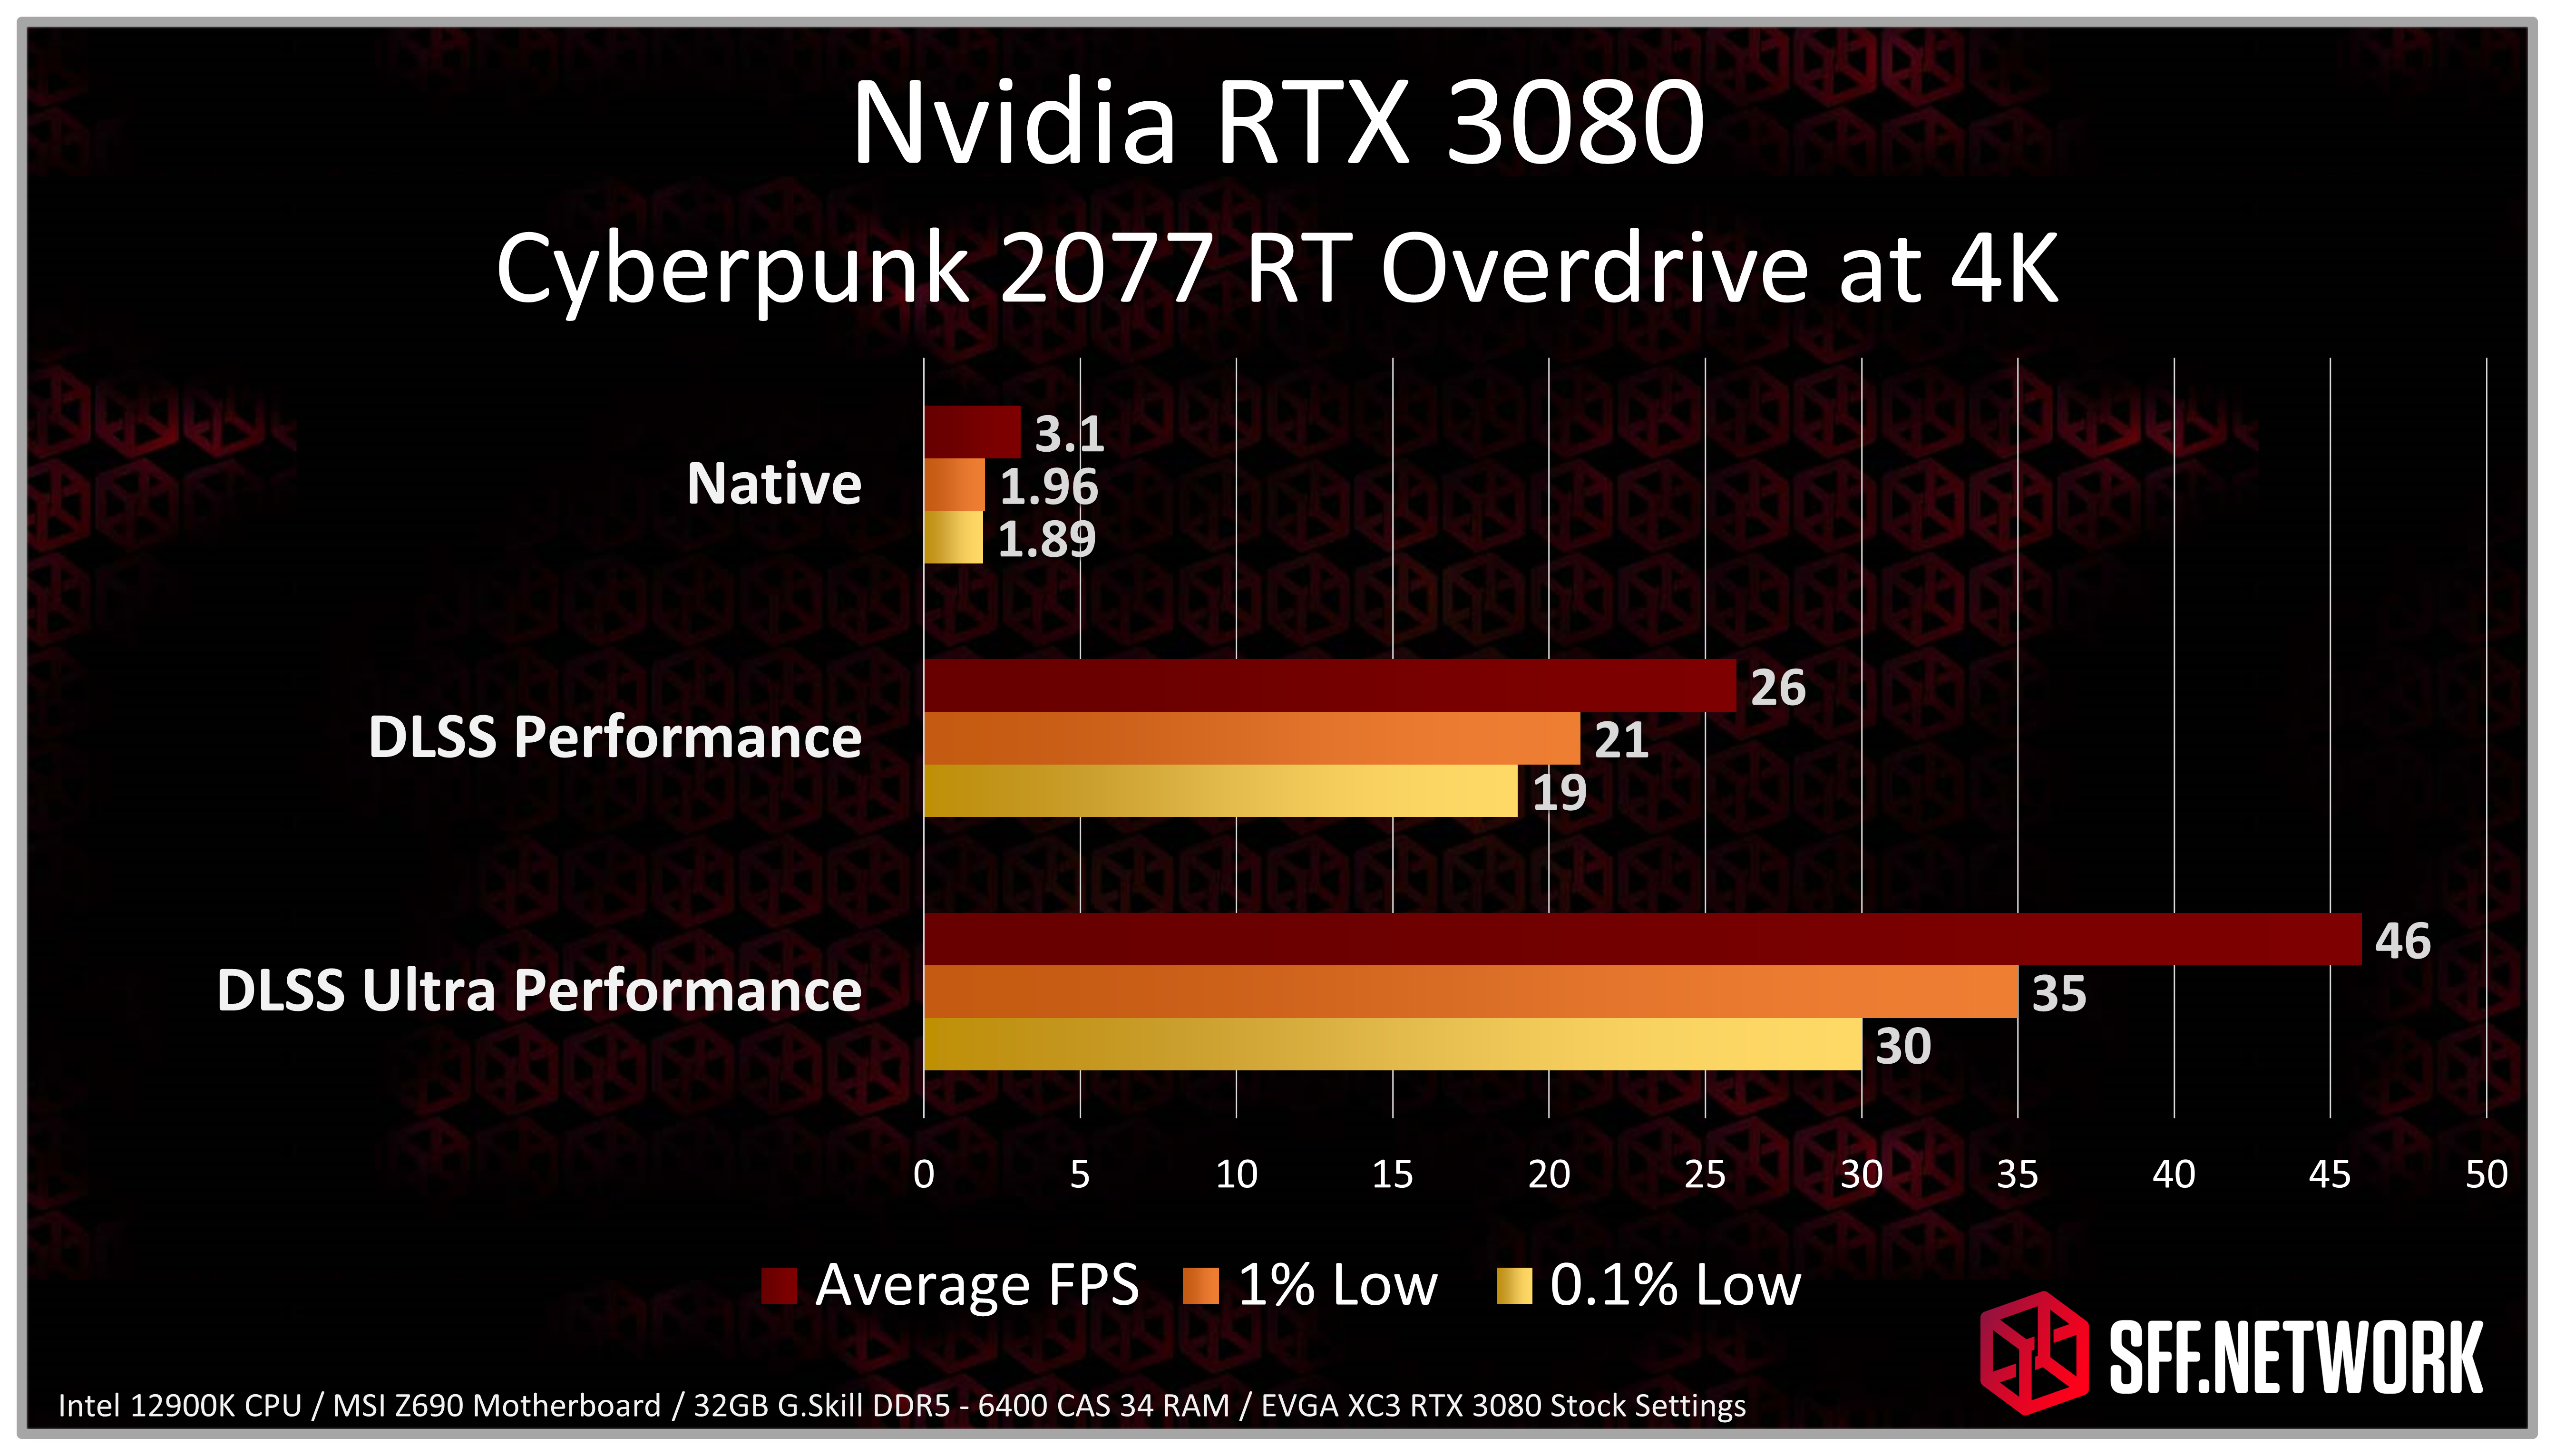 NVIDIA GeForce RTX3080 benchmarked in the 17 most demanding PC games